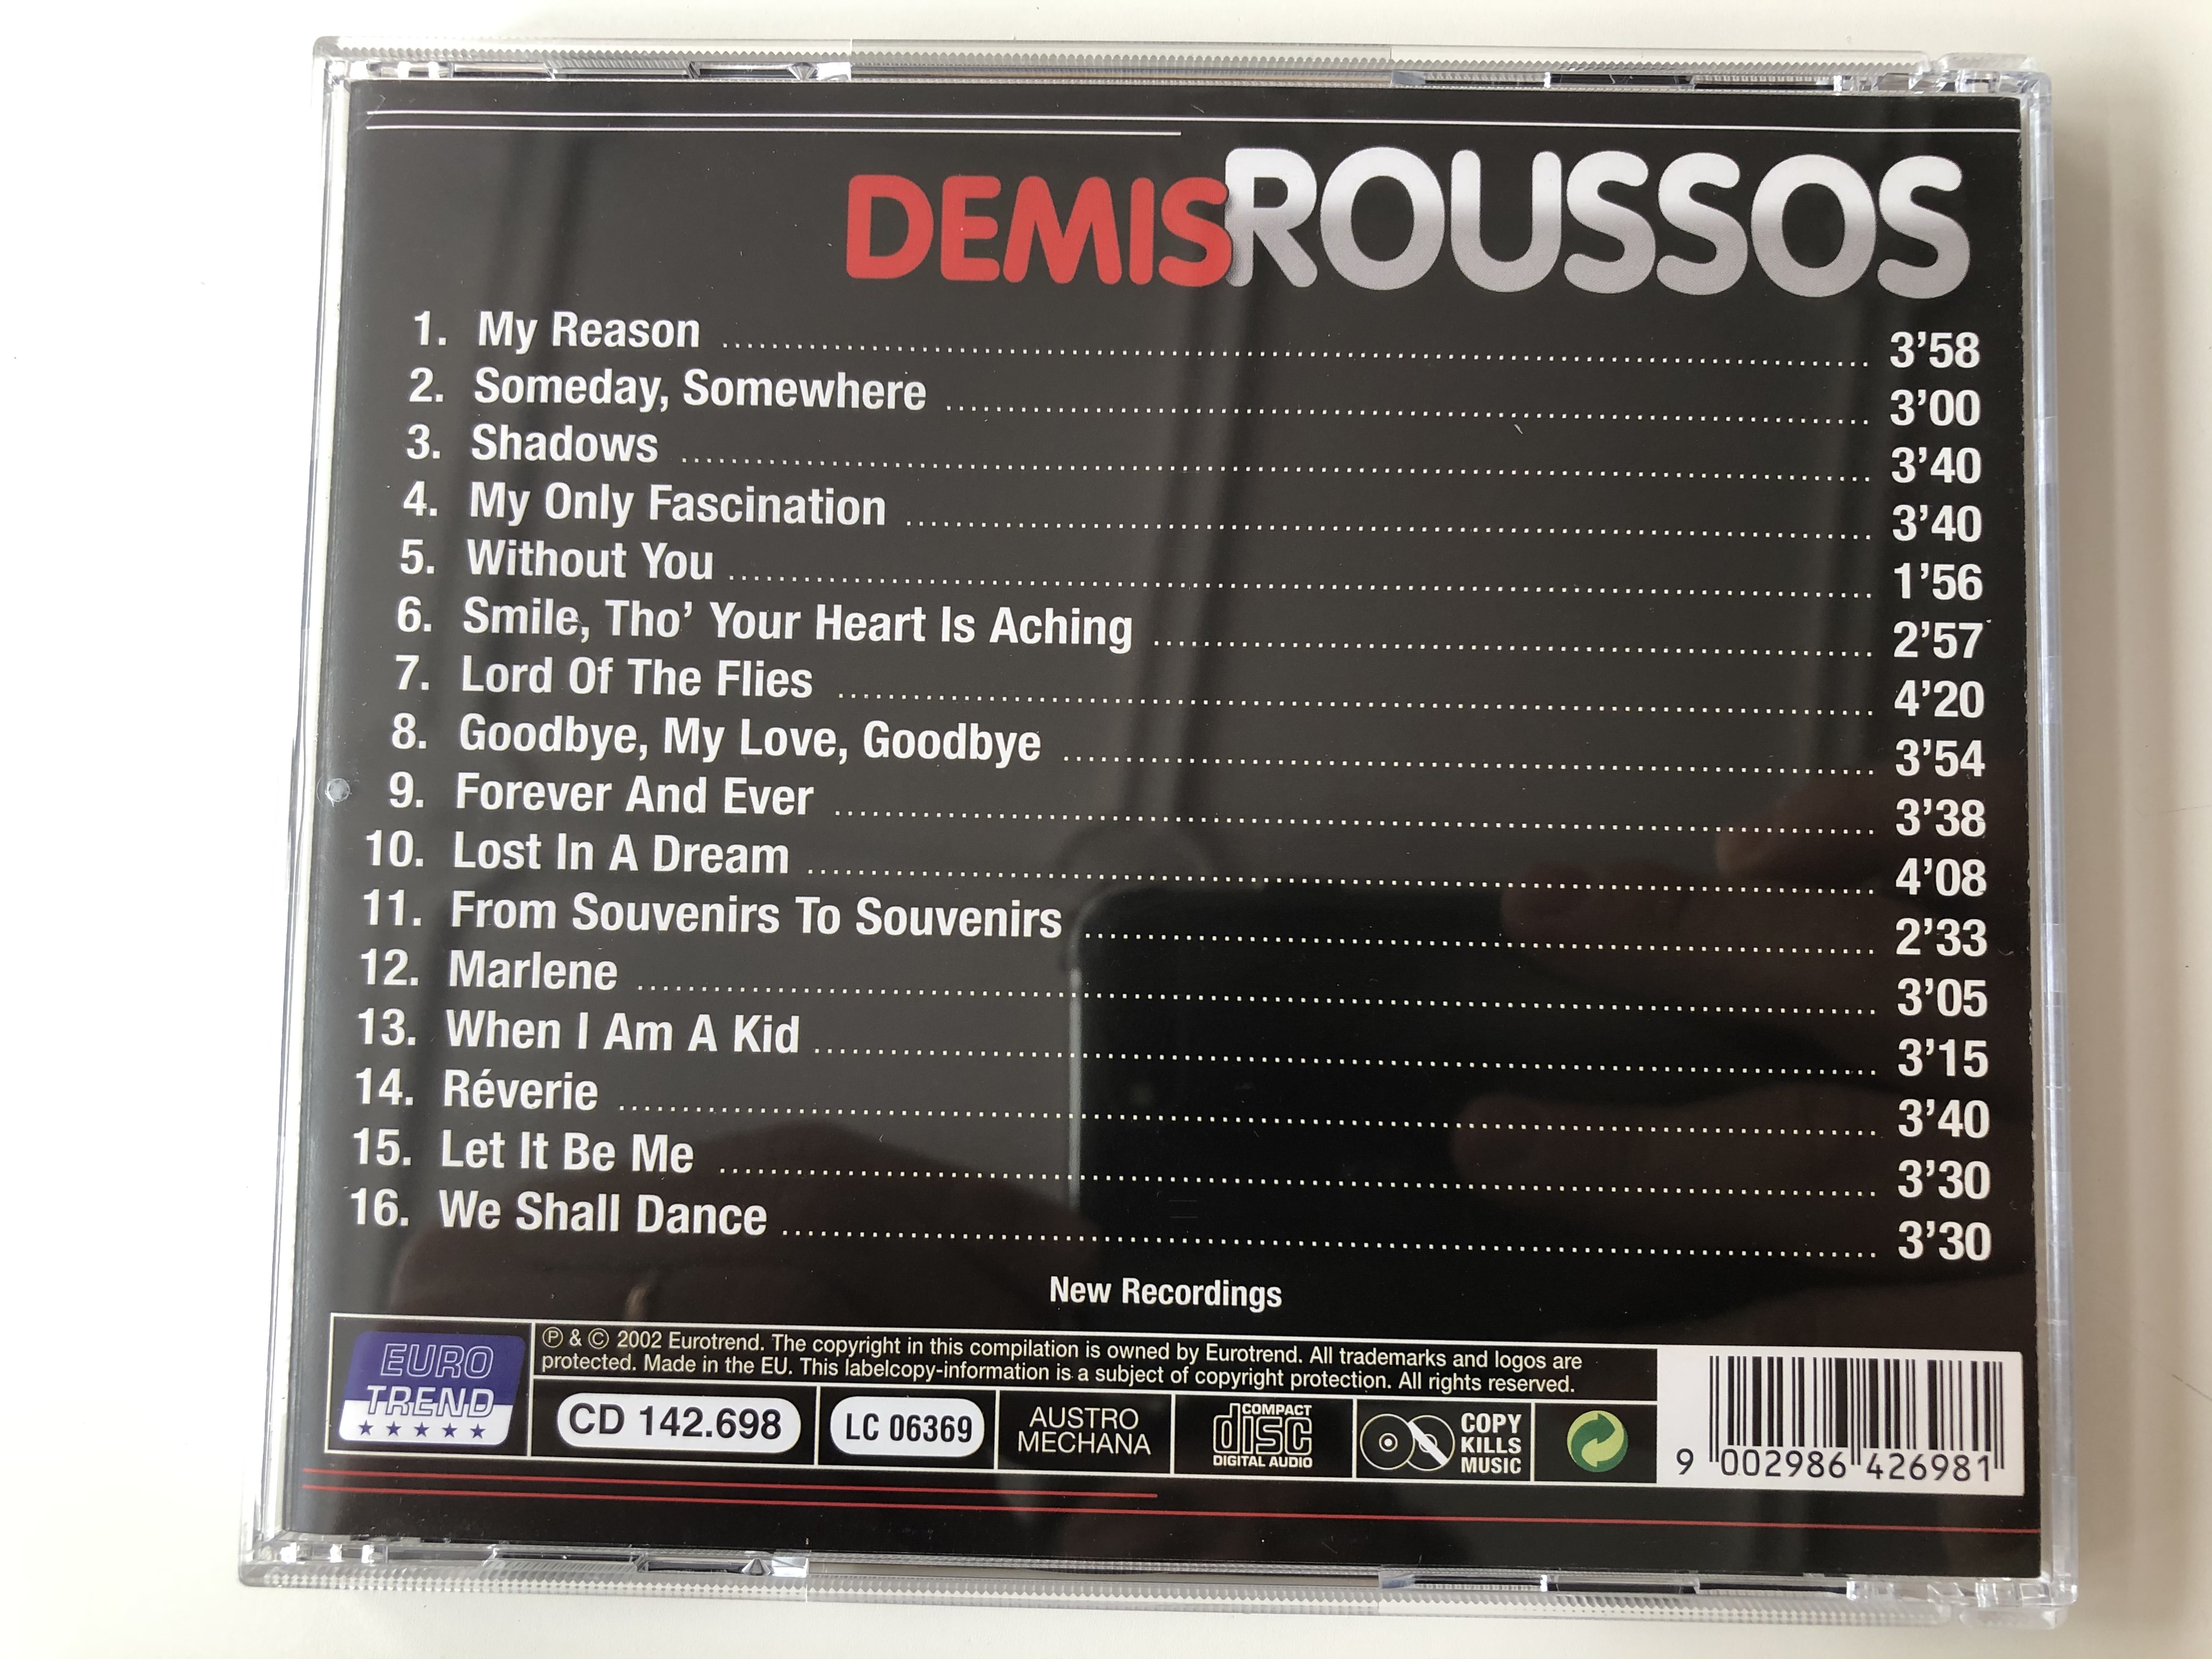 demis-roussos-best-of-goodbye-my-love-goodbye-forever-and-ever-we-shall-dance-from-souvenirs-to-souvenirs-my-only-fascination-eurotrend-audio-cd-2002-stereo-cd-156-4-.jpg